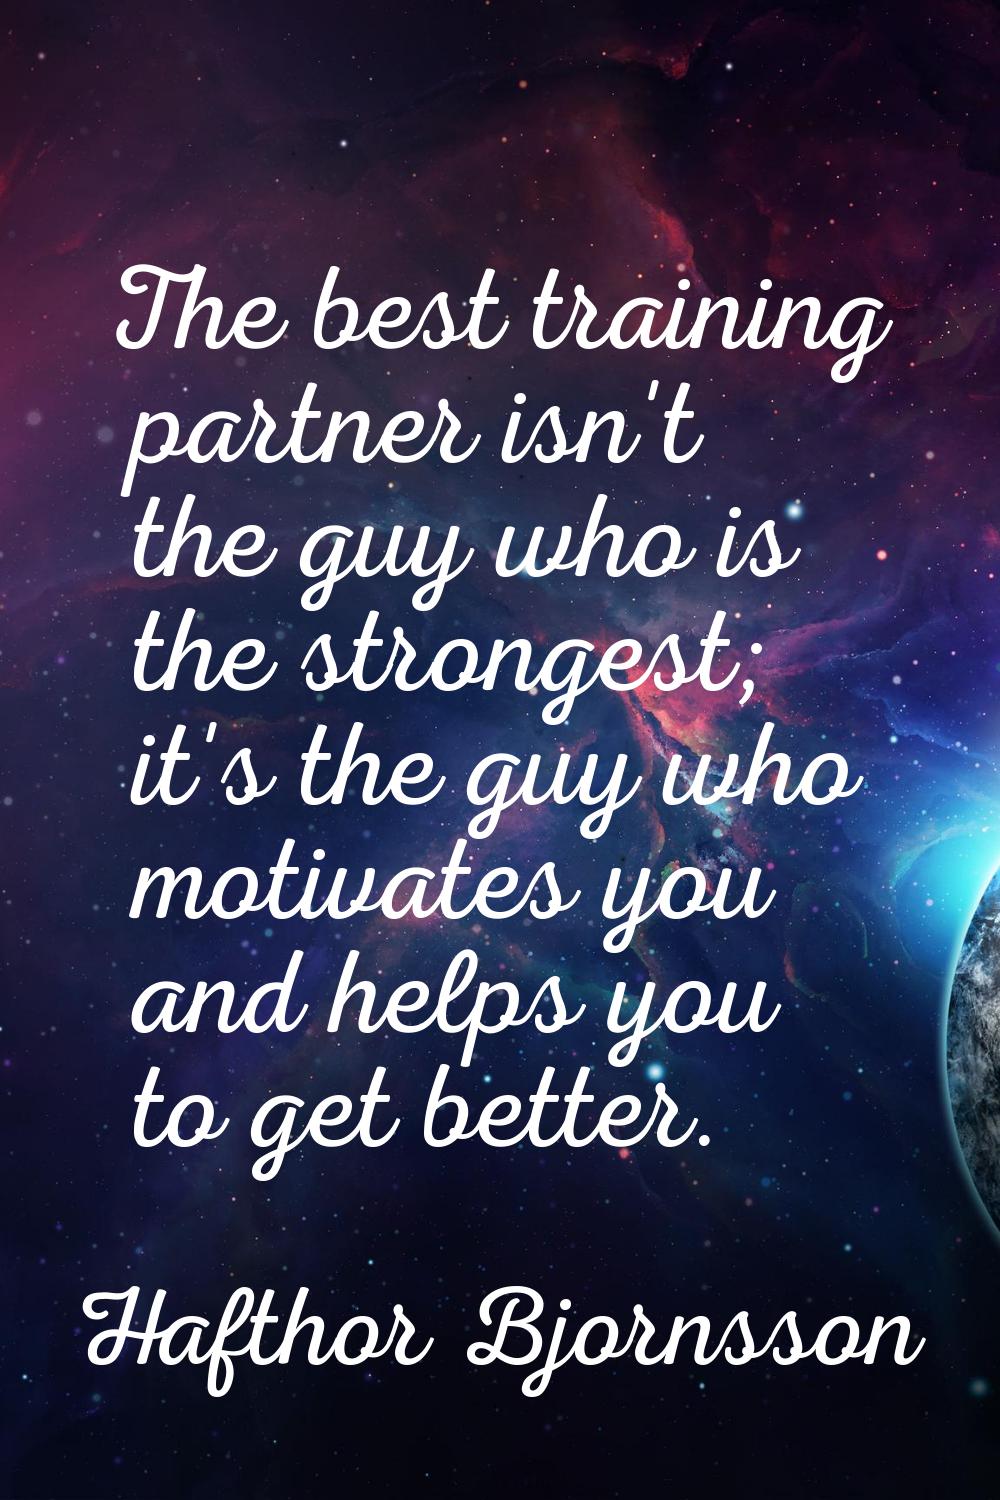 The best training partner isn't the guy who is the strongest; it's the guy who motivates you and he